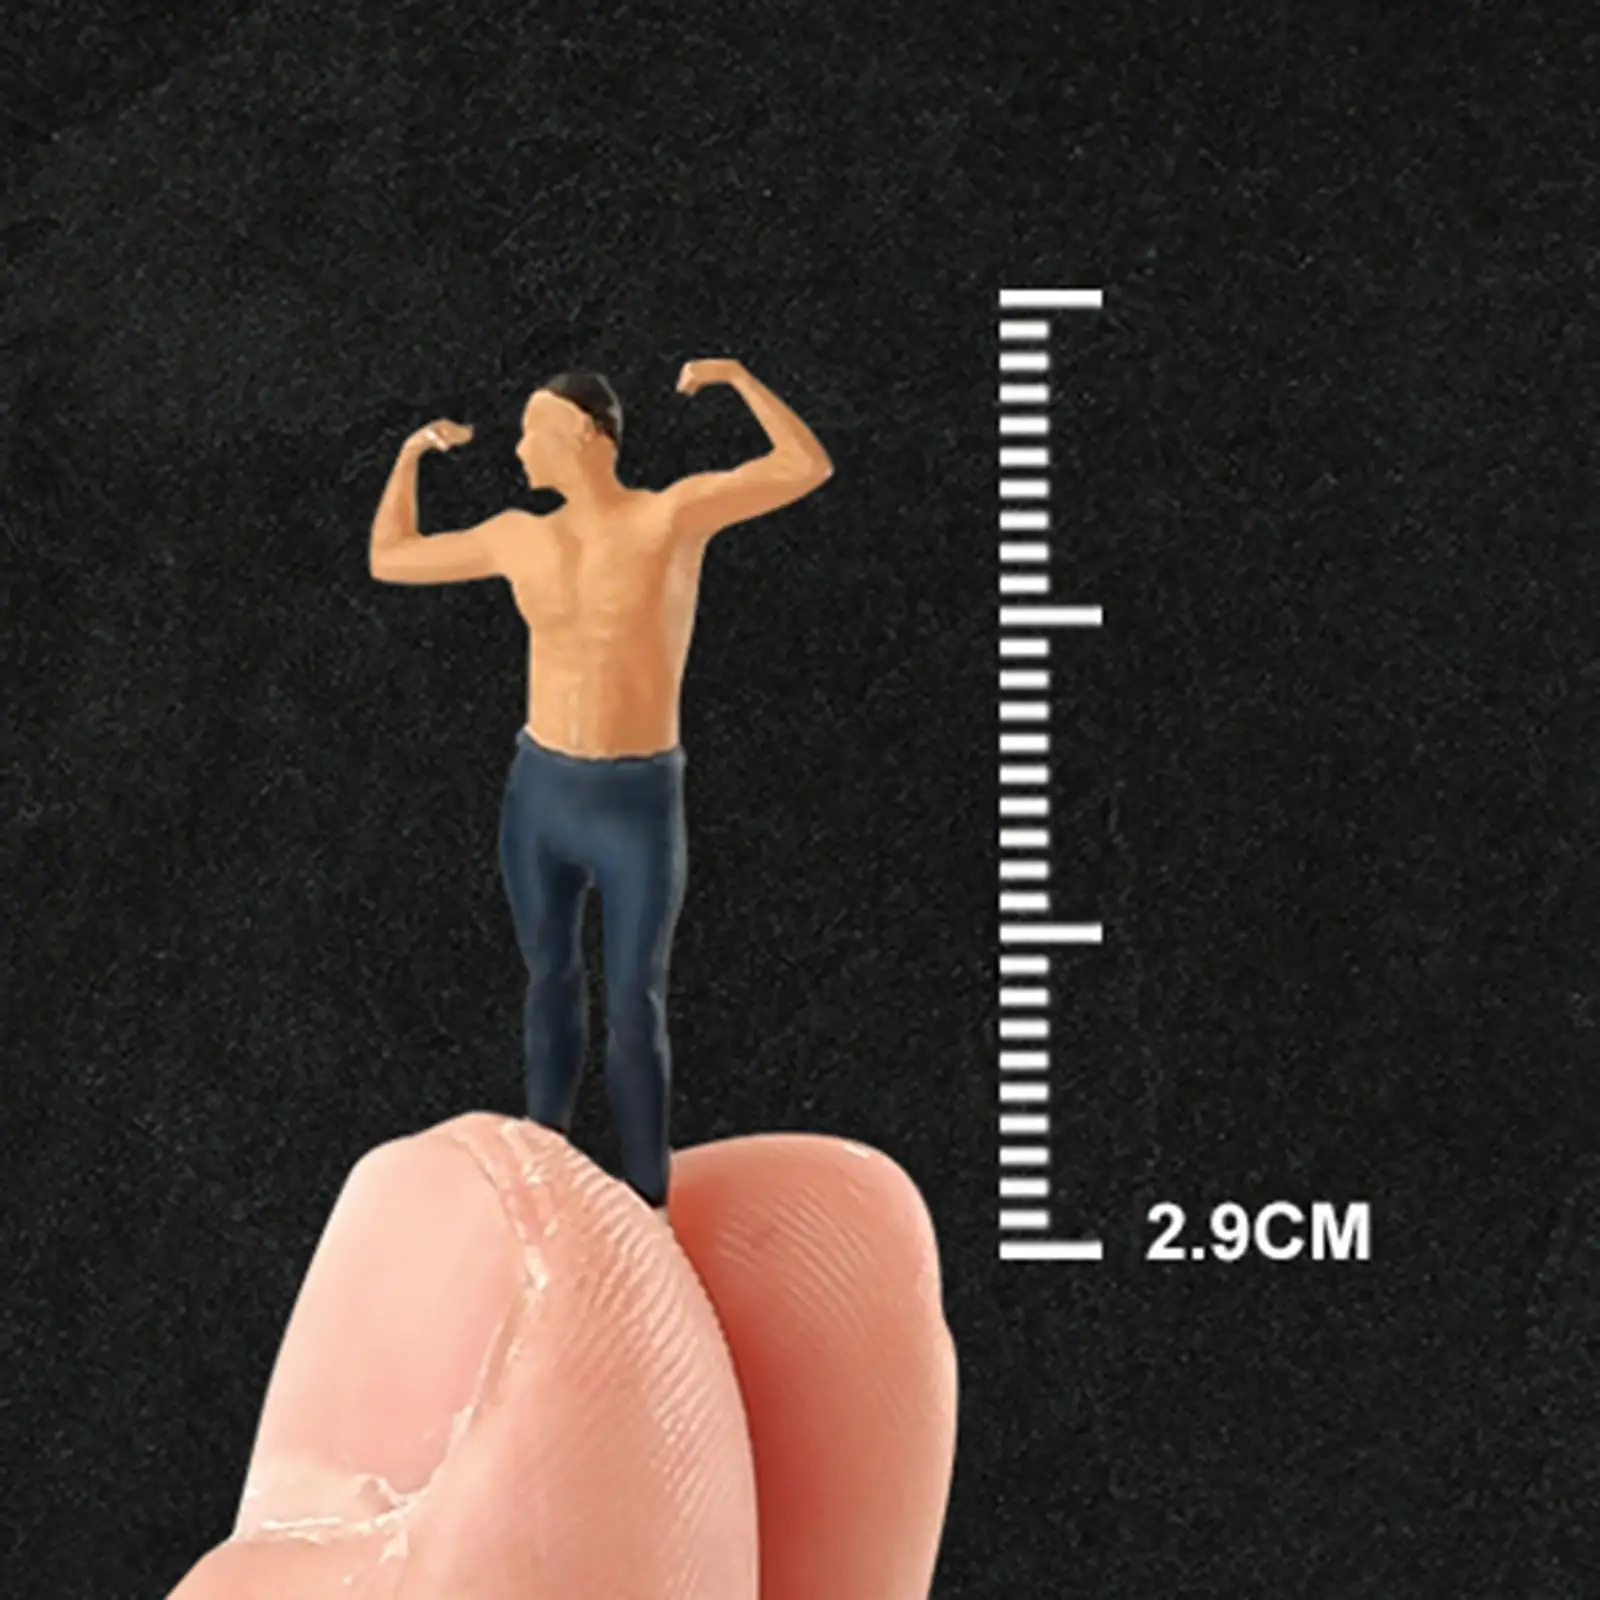 1/64 Mini Ornaments Miniature Figurines Model Realistic Shape for Home Decoration Waterproof Multifunctional for Bodybuilder